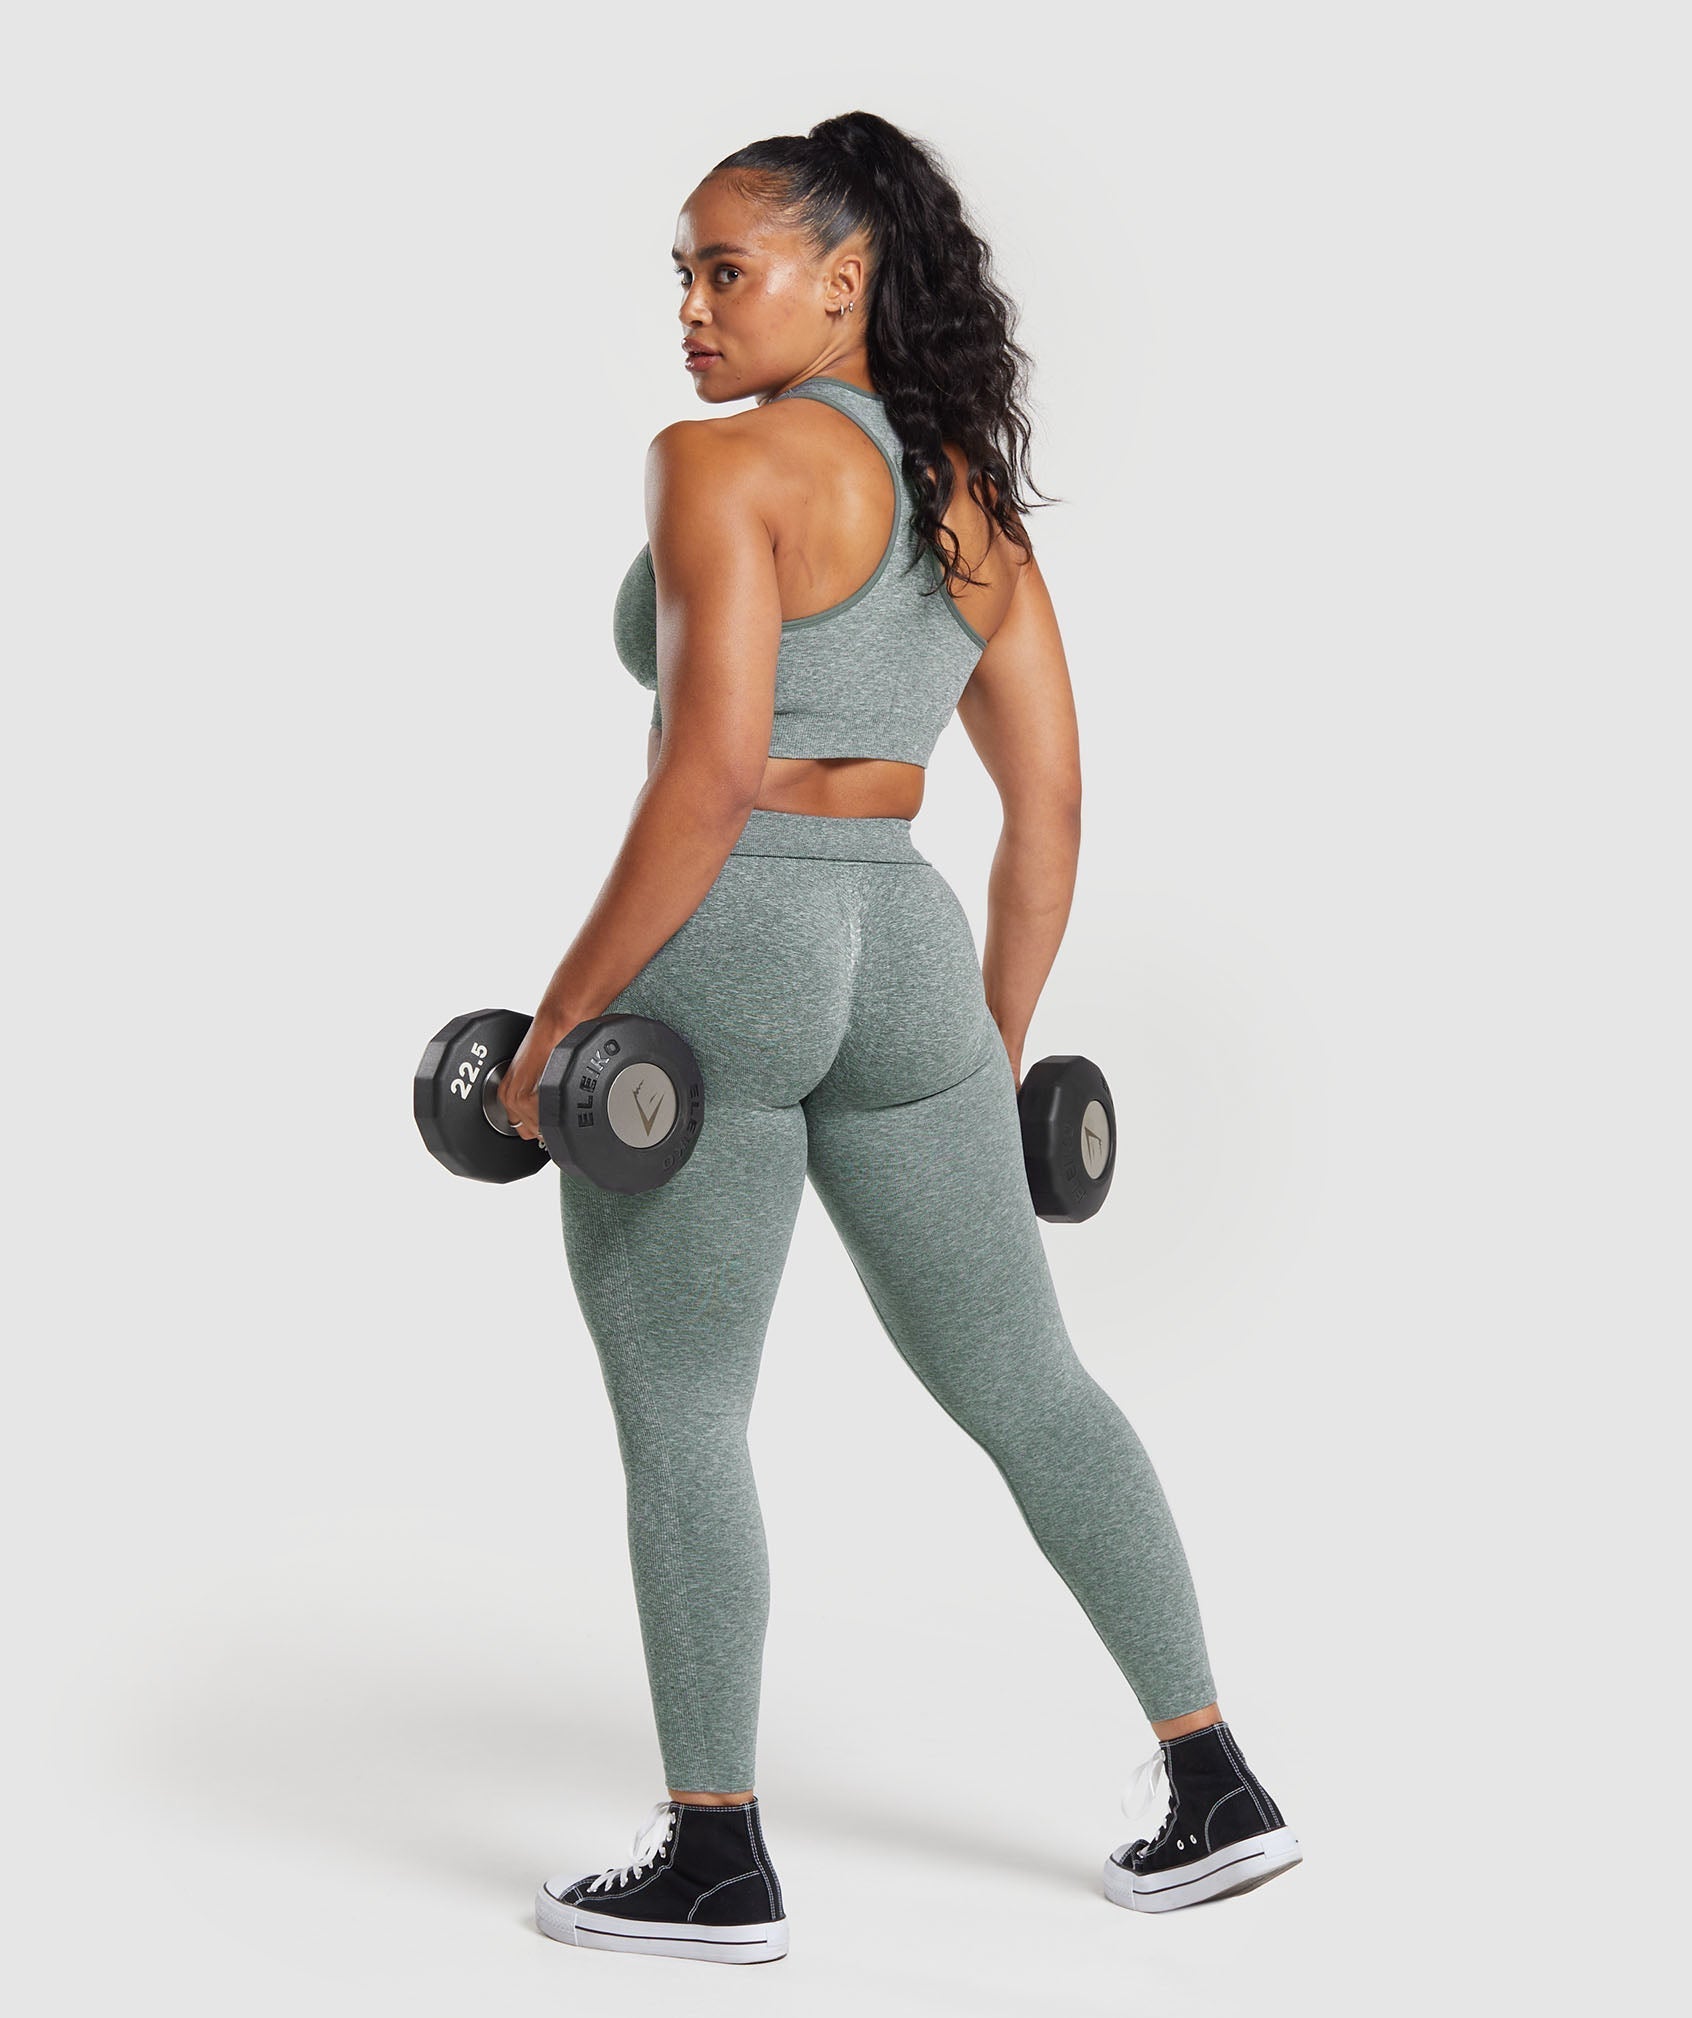 Lift Contour Seamless Leggings in Slate Teal/White Marl - view 6